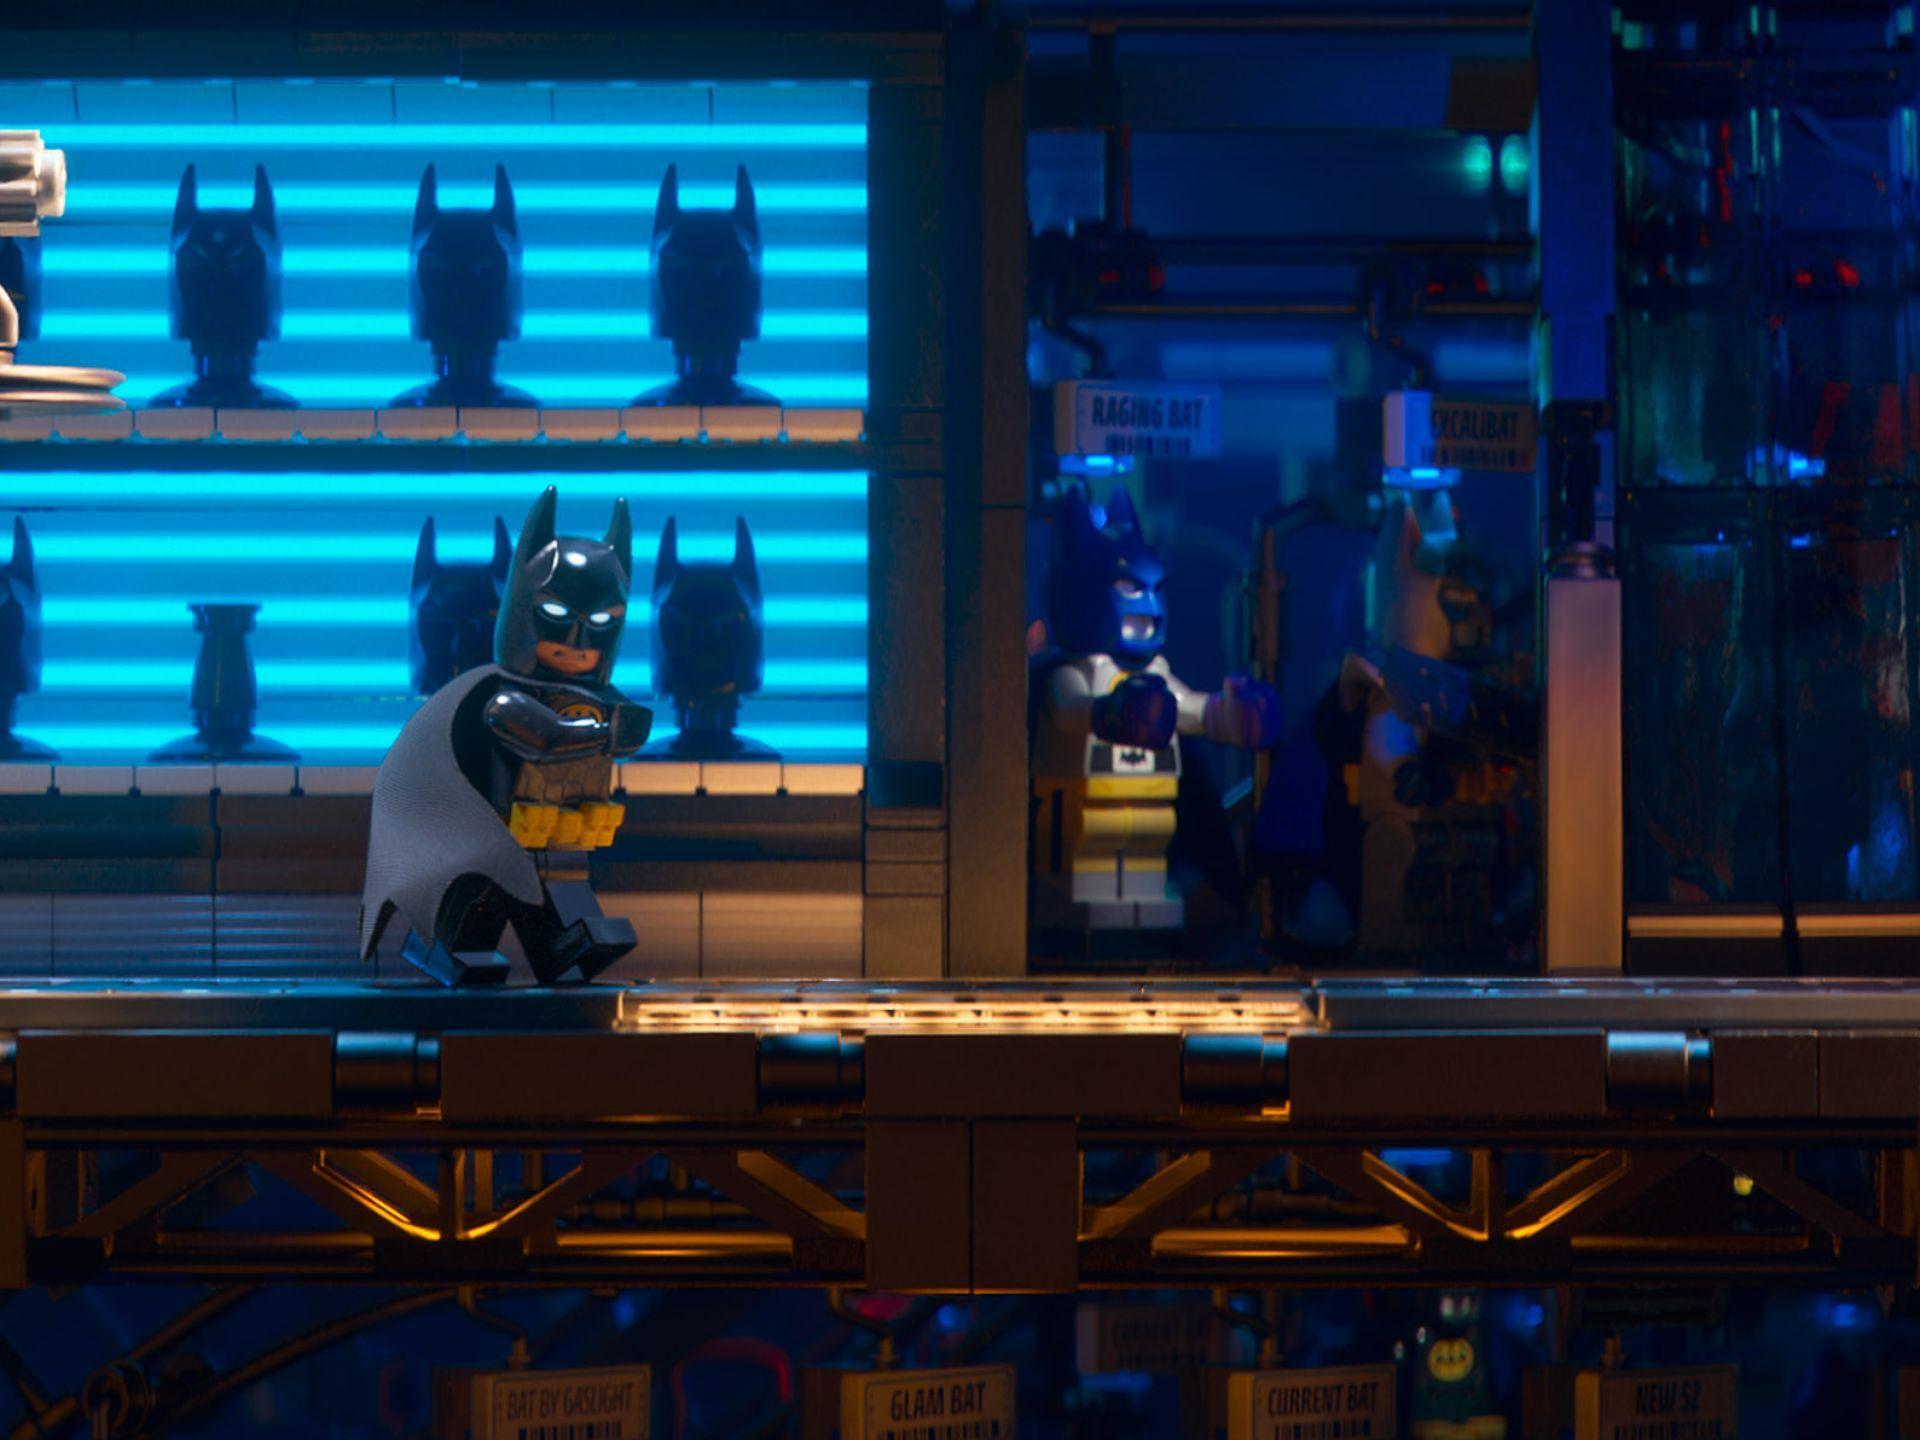 See Lego Batman Movie&First Wallpaper Here, They&Very Cool